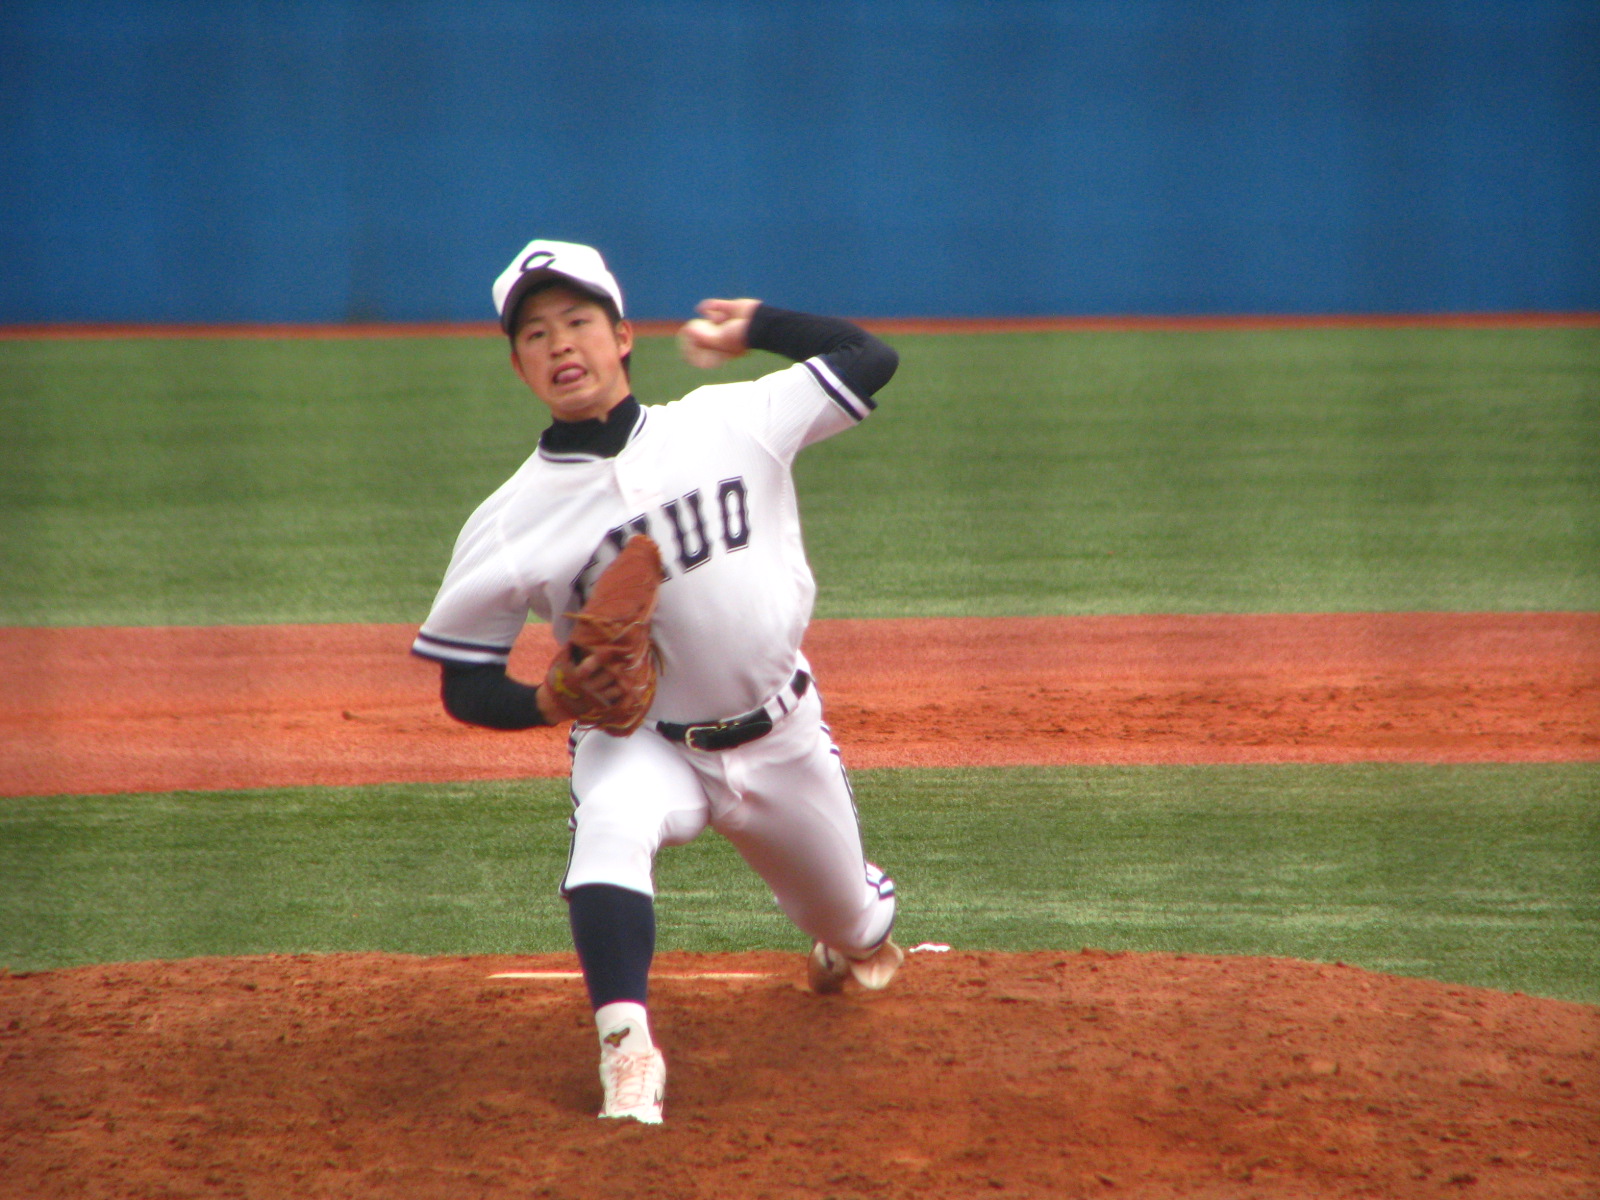 a young baseball player in uniform throws a pitch from the mound